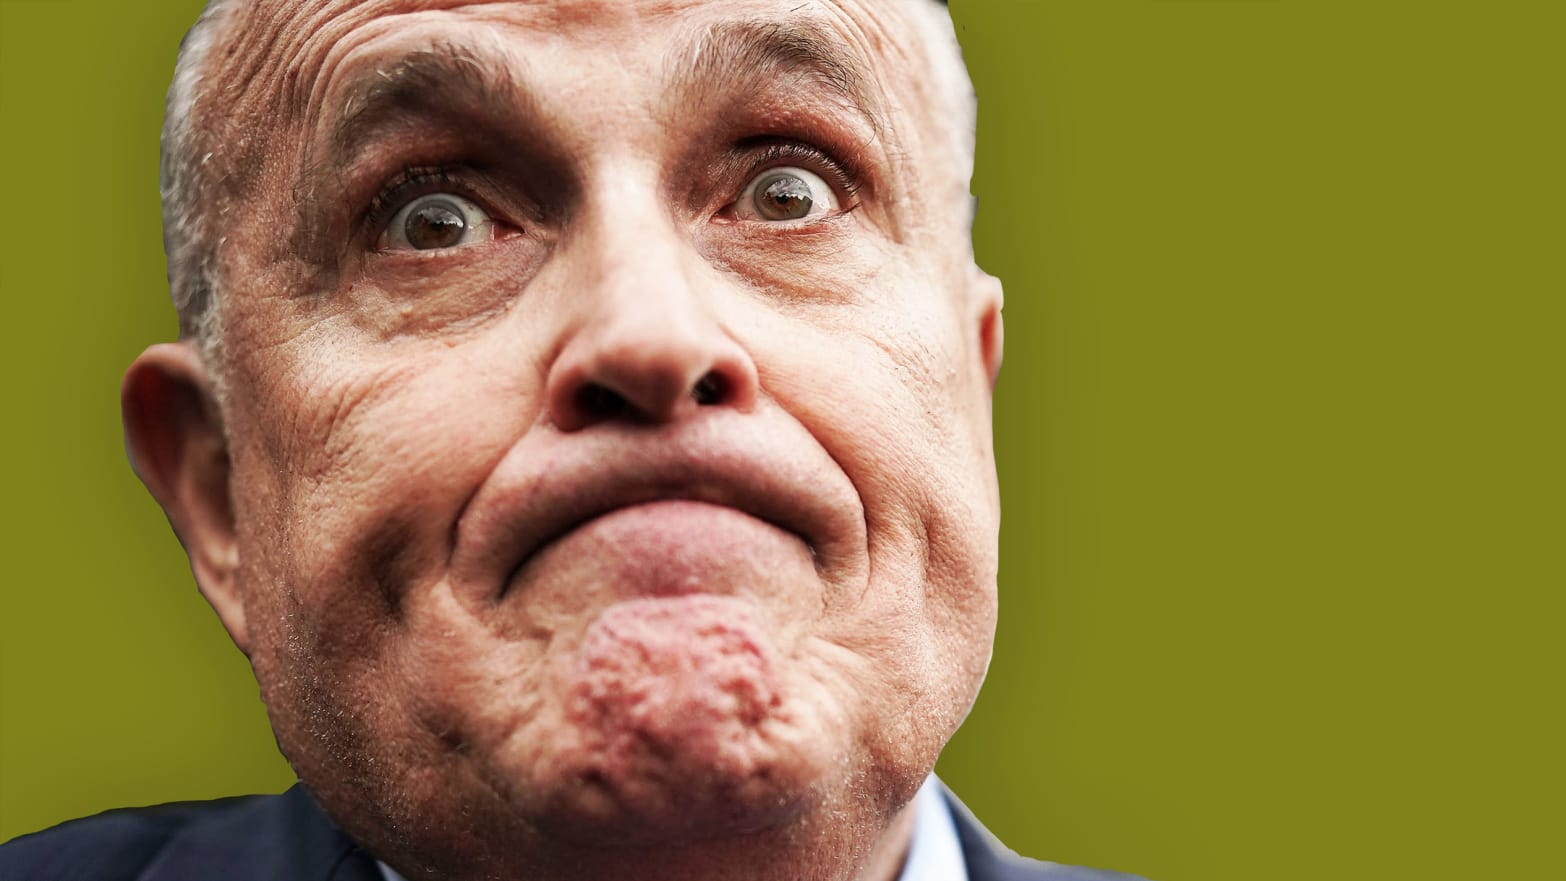 Porn Stars Are Furious With Rudy Giuliani: 'A Storm's a-Coming'